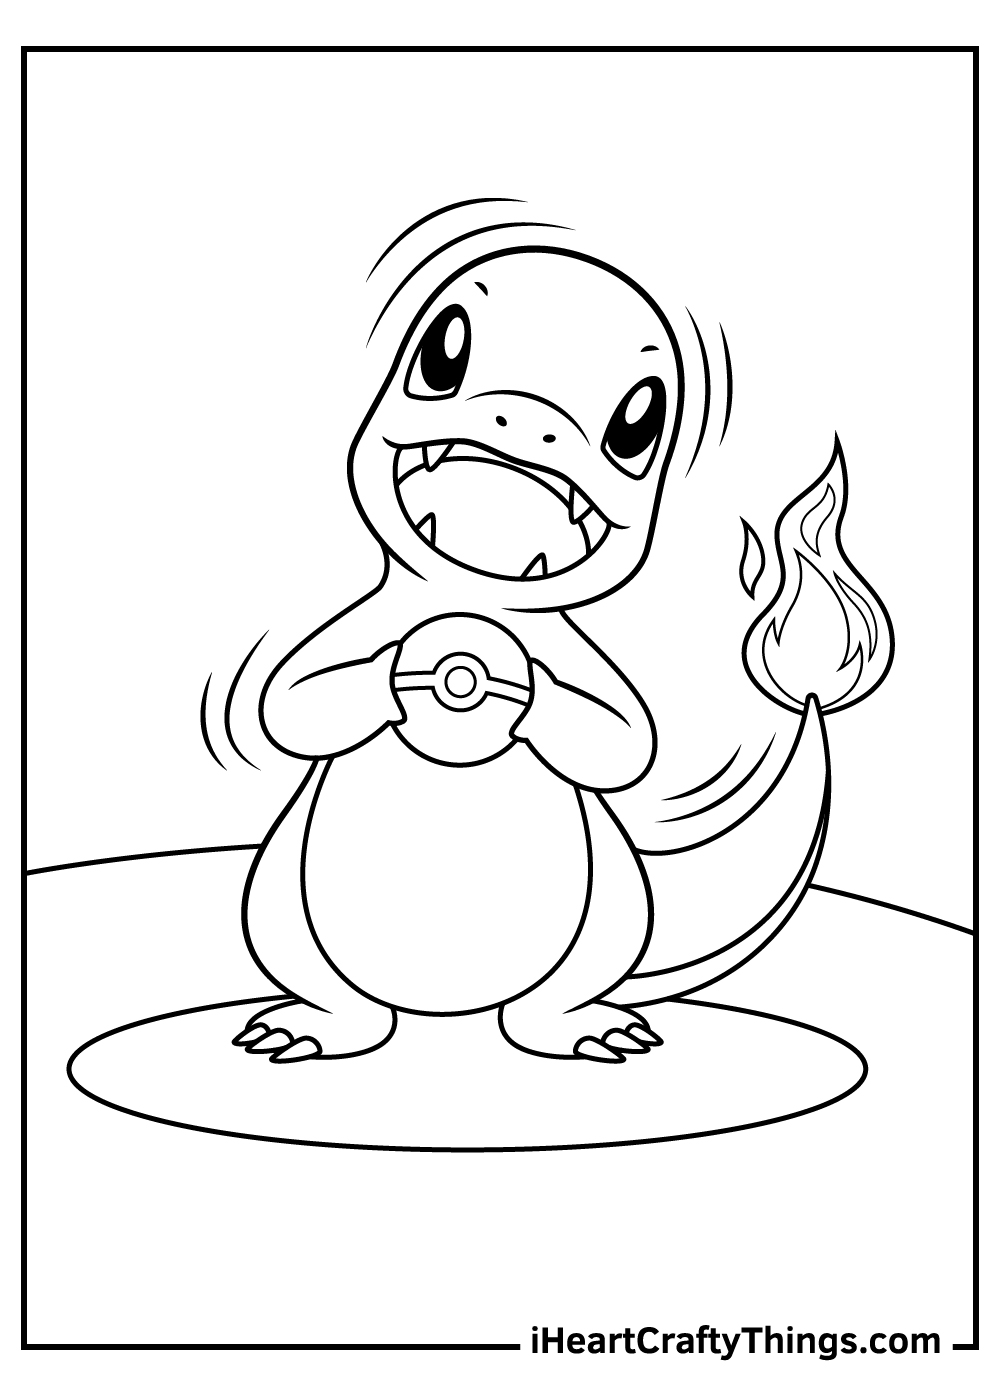 Charmander Coloring Pages Updated 20